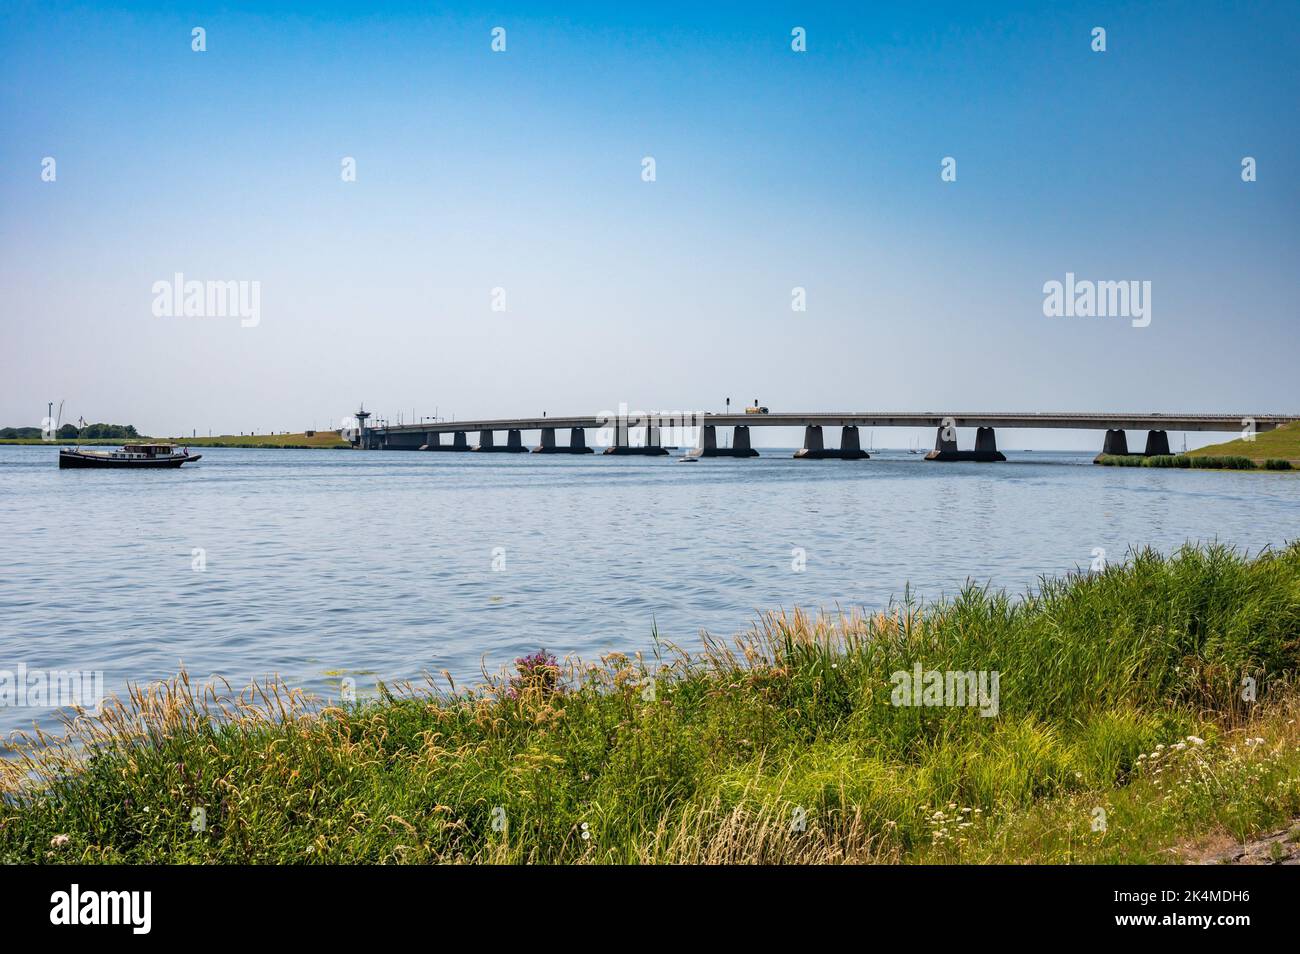 Nagele, Flevoland, The Netherlands - Bridge over the Ketel lake with the green polder and ships. Stock Photo